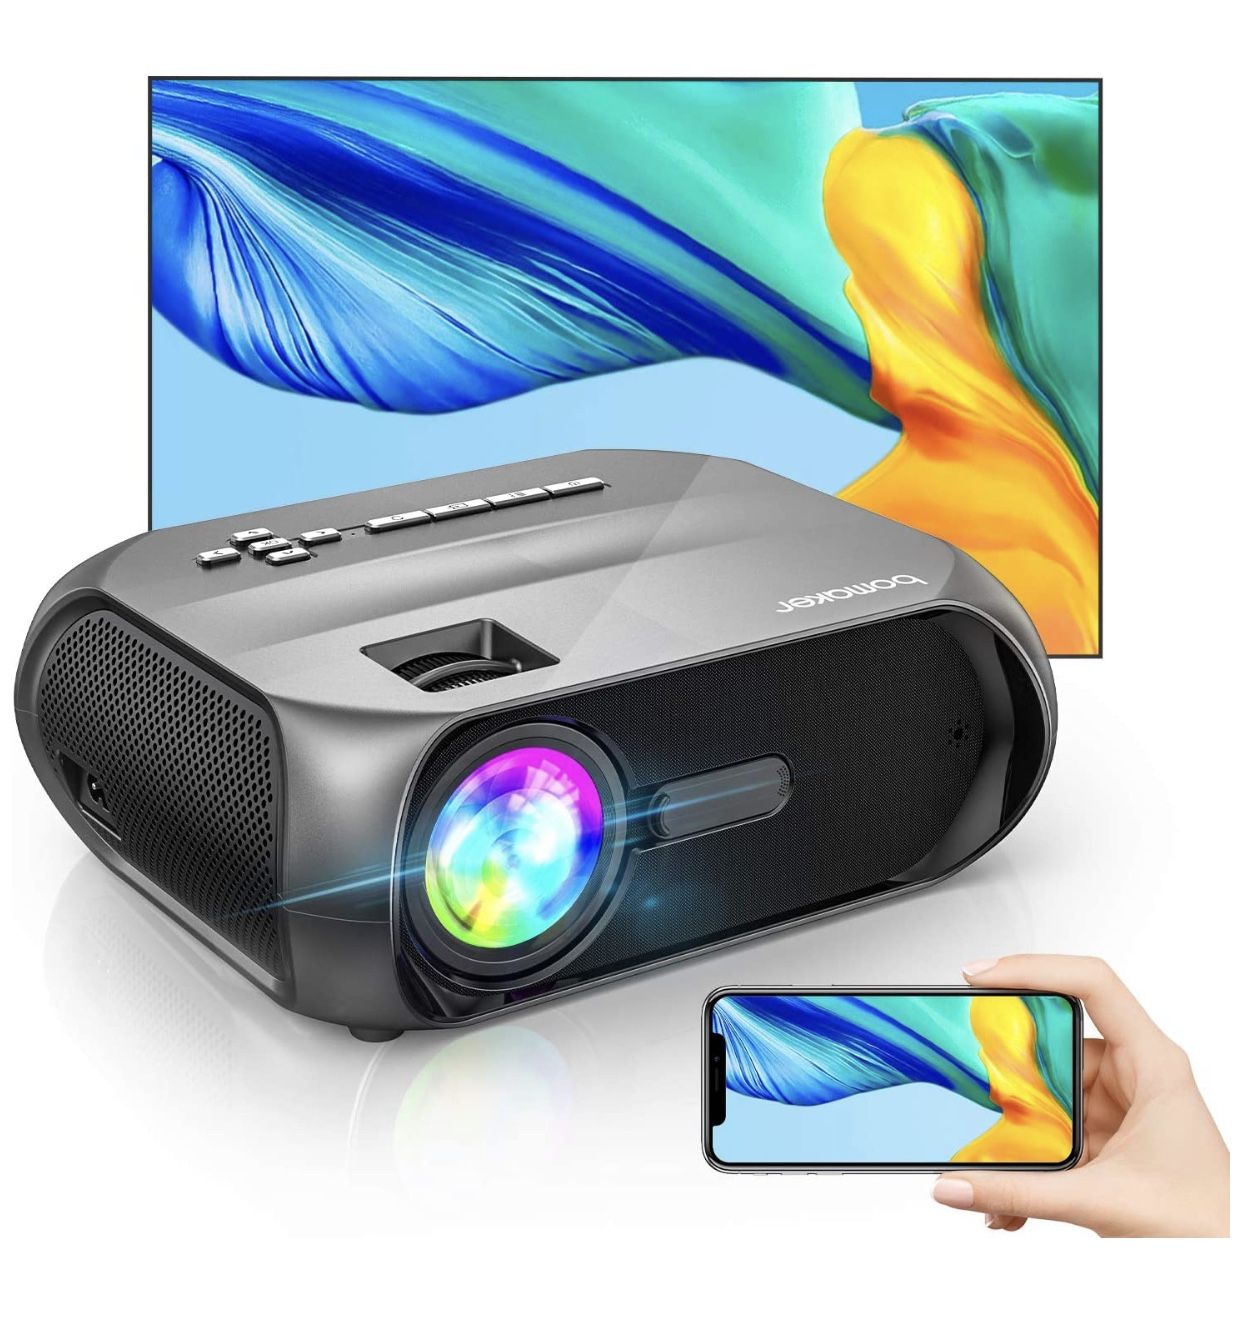 Wi-Fi Mini Outdoor Projector, Portable Projector for Outdoor Movies, Full HD 1080P Supported, Wireless Mirroring by WiFi / USB Cable, for iPhone / And